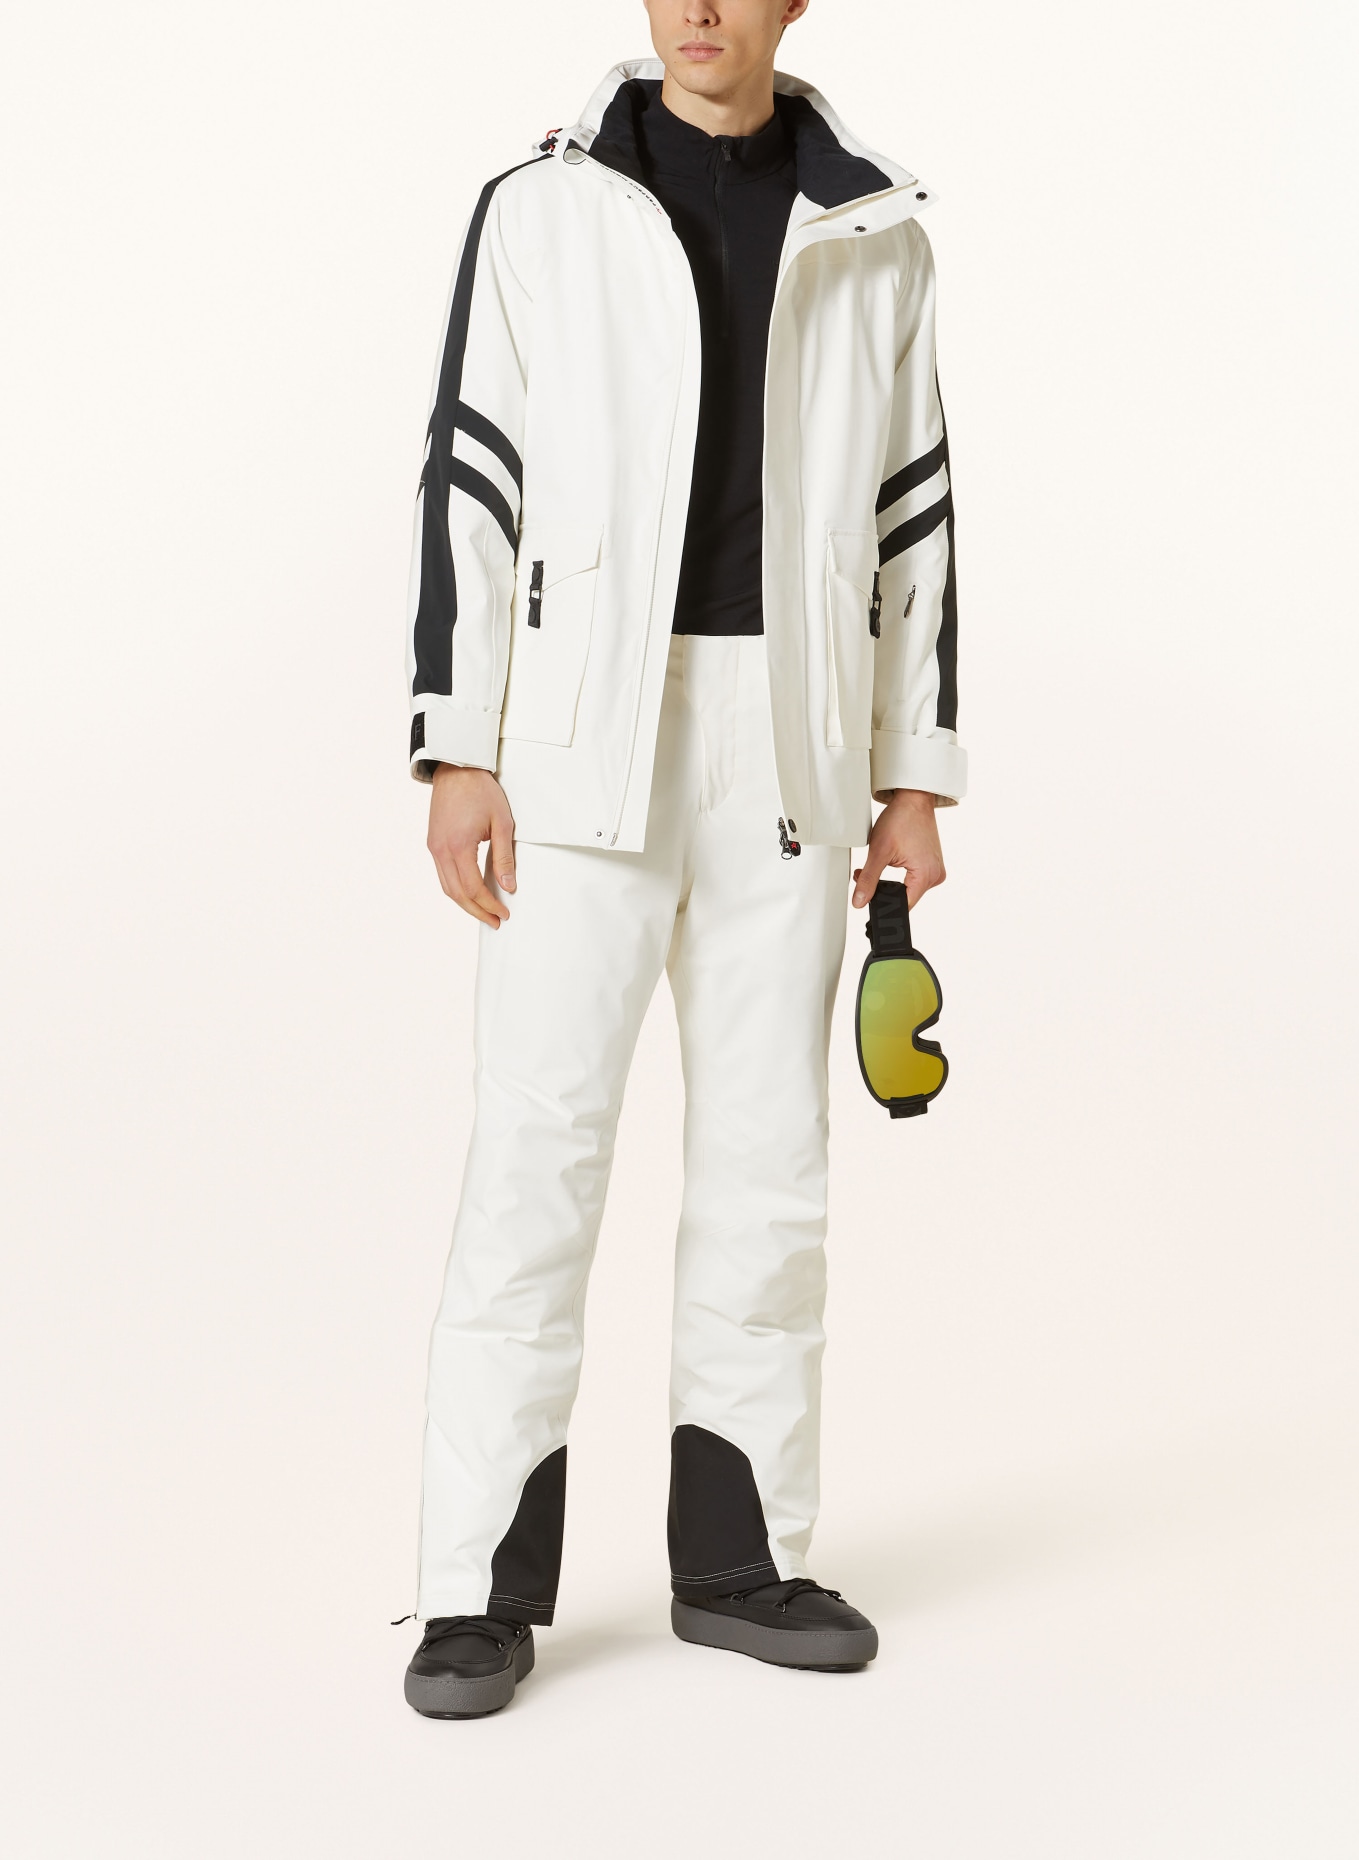 Pants, 350£ at perfectmoment.com - Wheretoget  Apres ski outfits, Skiing  outfit, White ski outfit